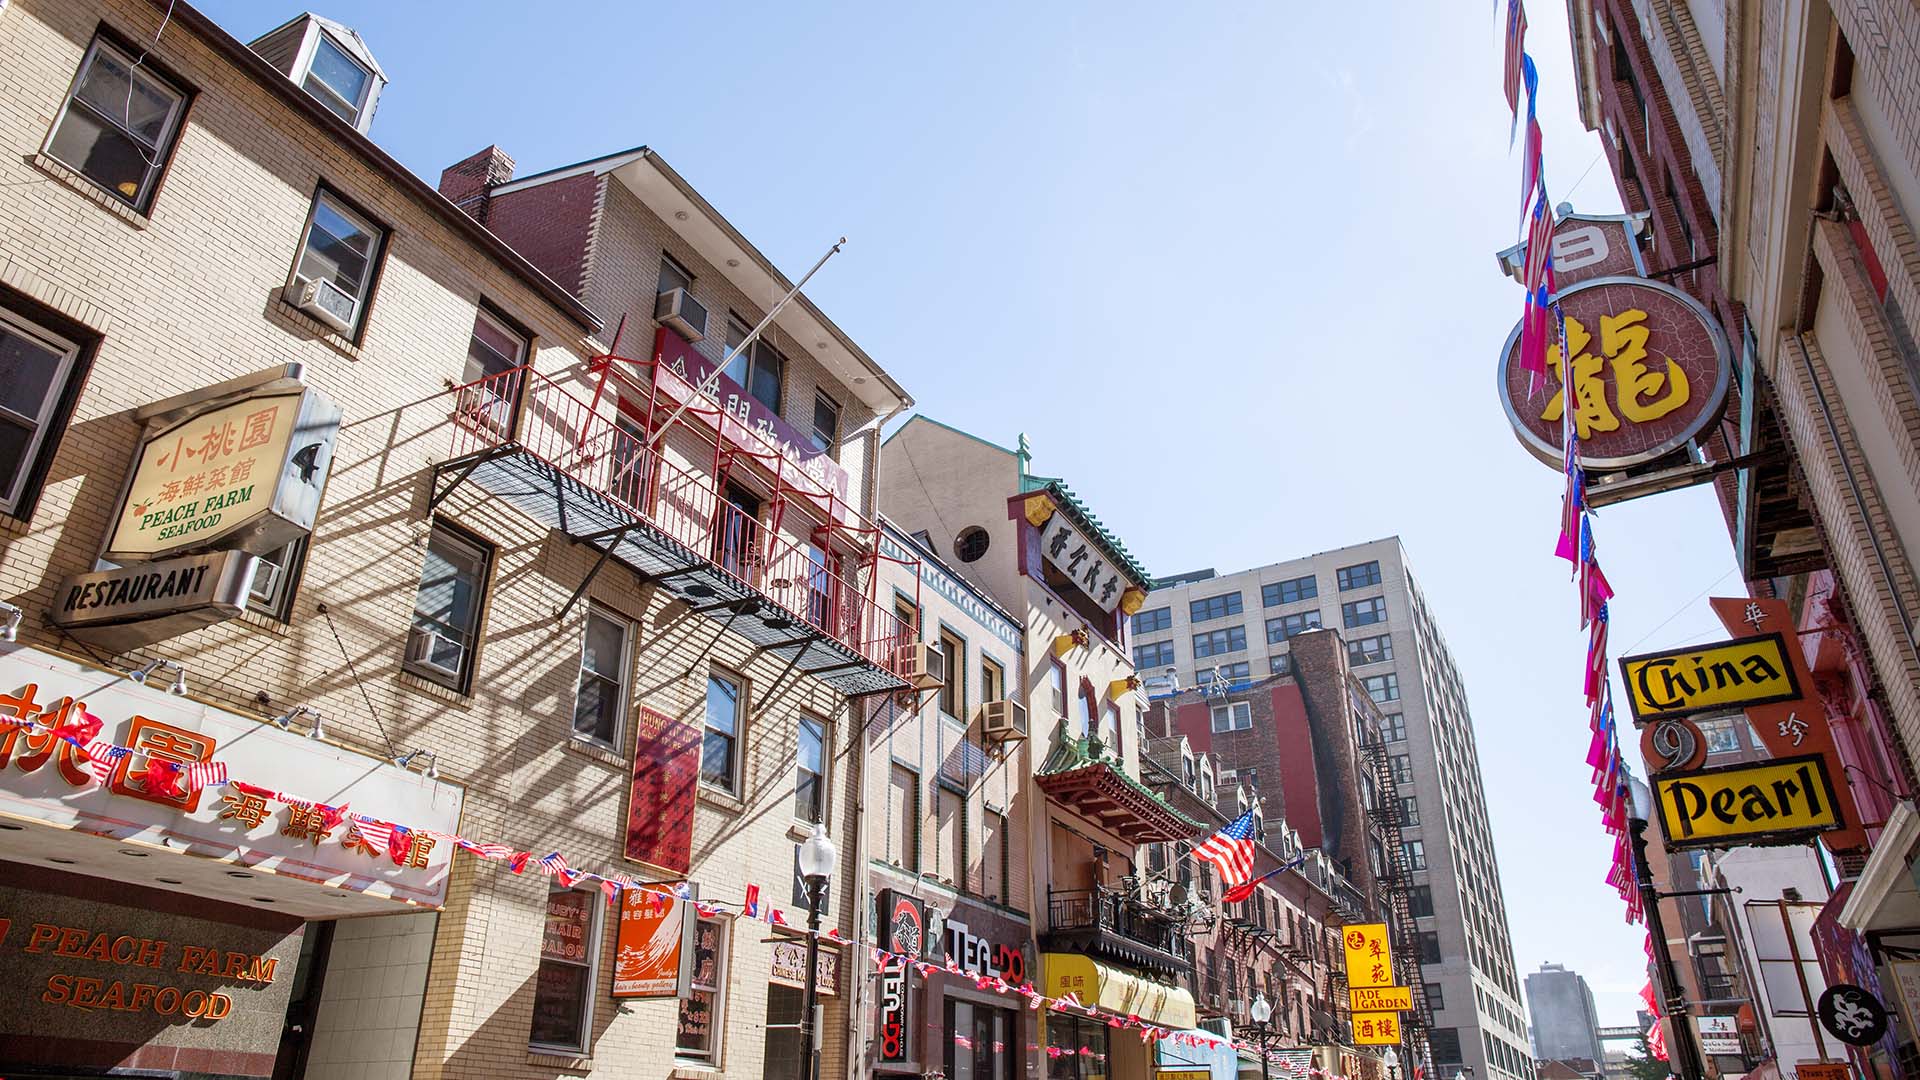 Must-Eat Dishes at Boston’s Chinatown Restaurants